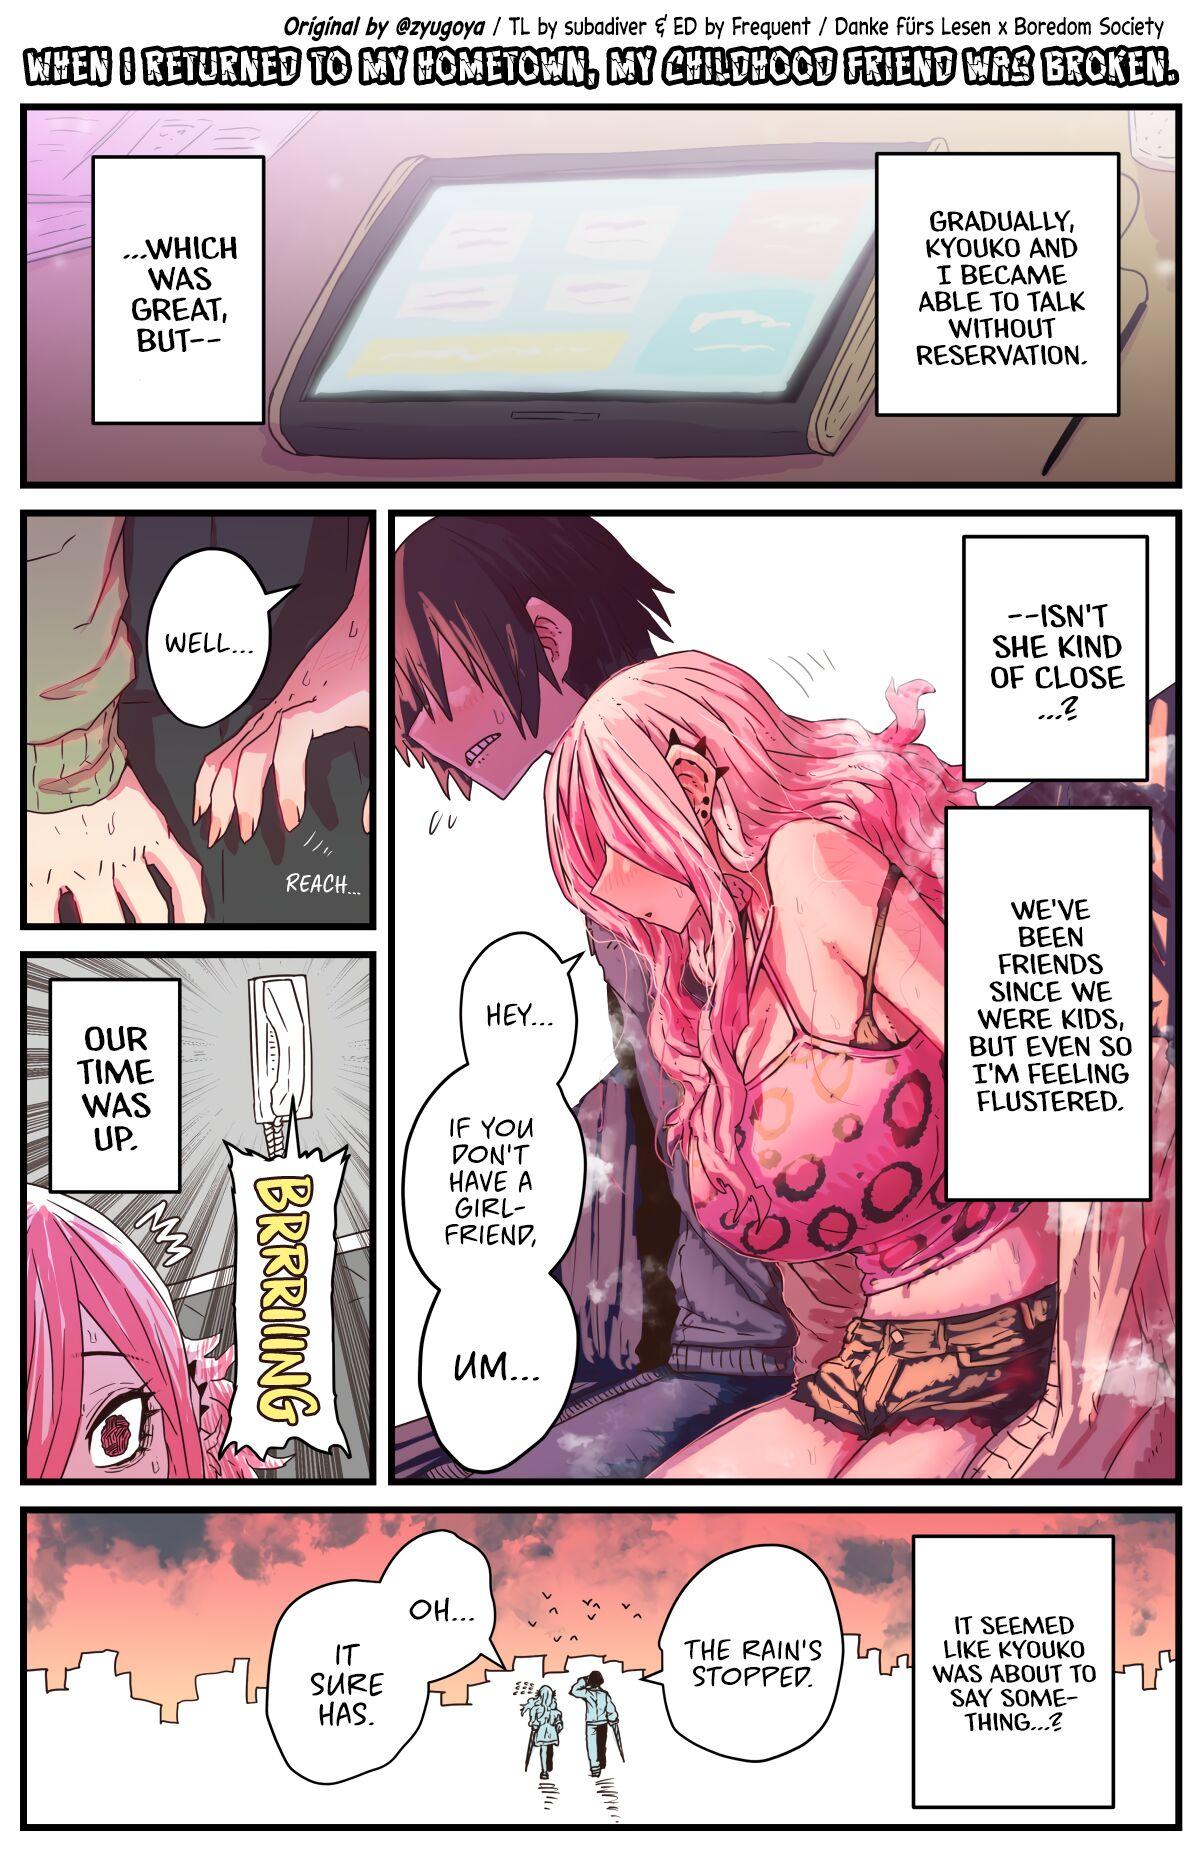 Mmf When I Returned to My Hometown, My Childhood Friend was Broken - Original Amatoriale - Page 10